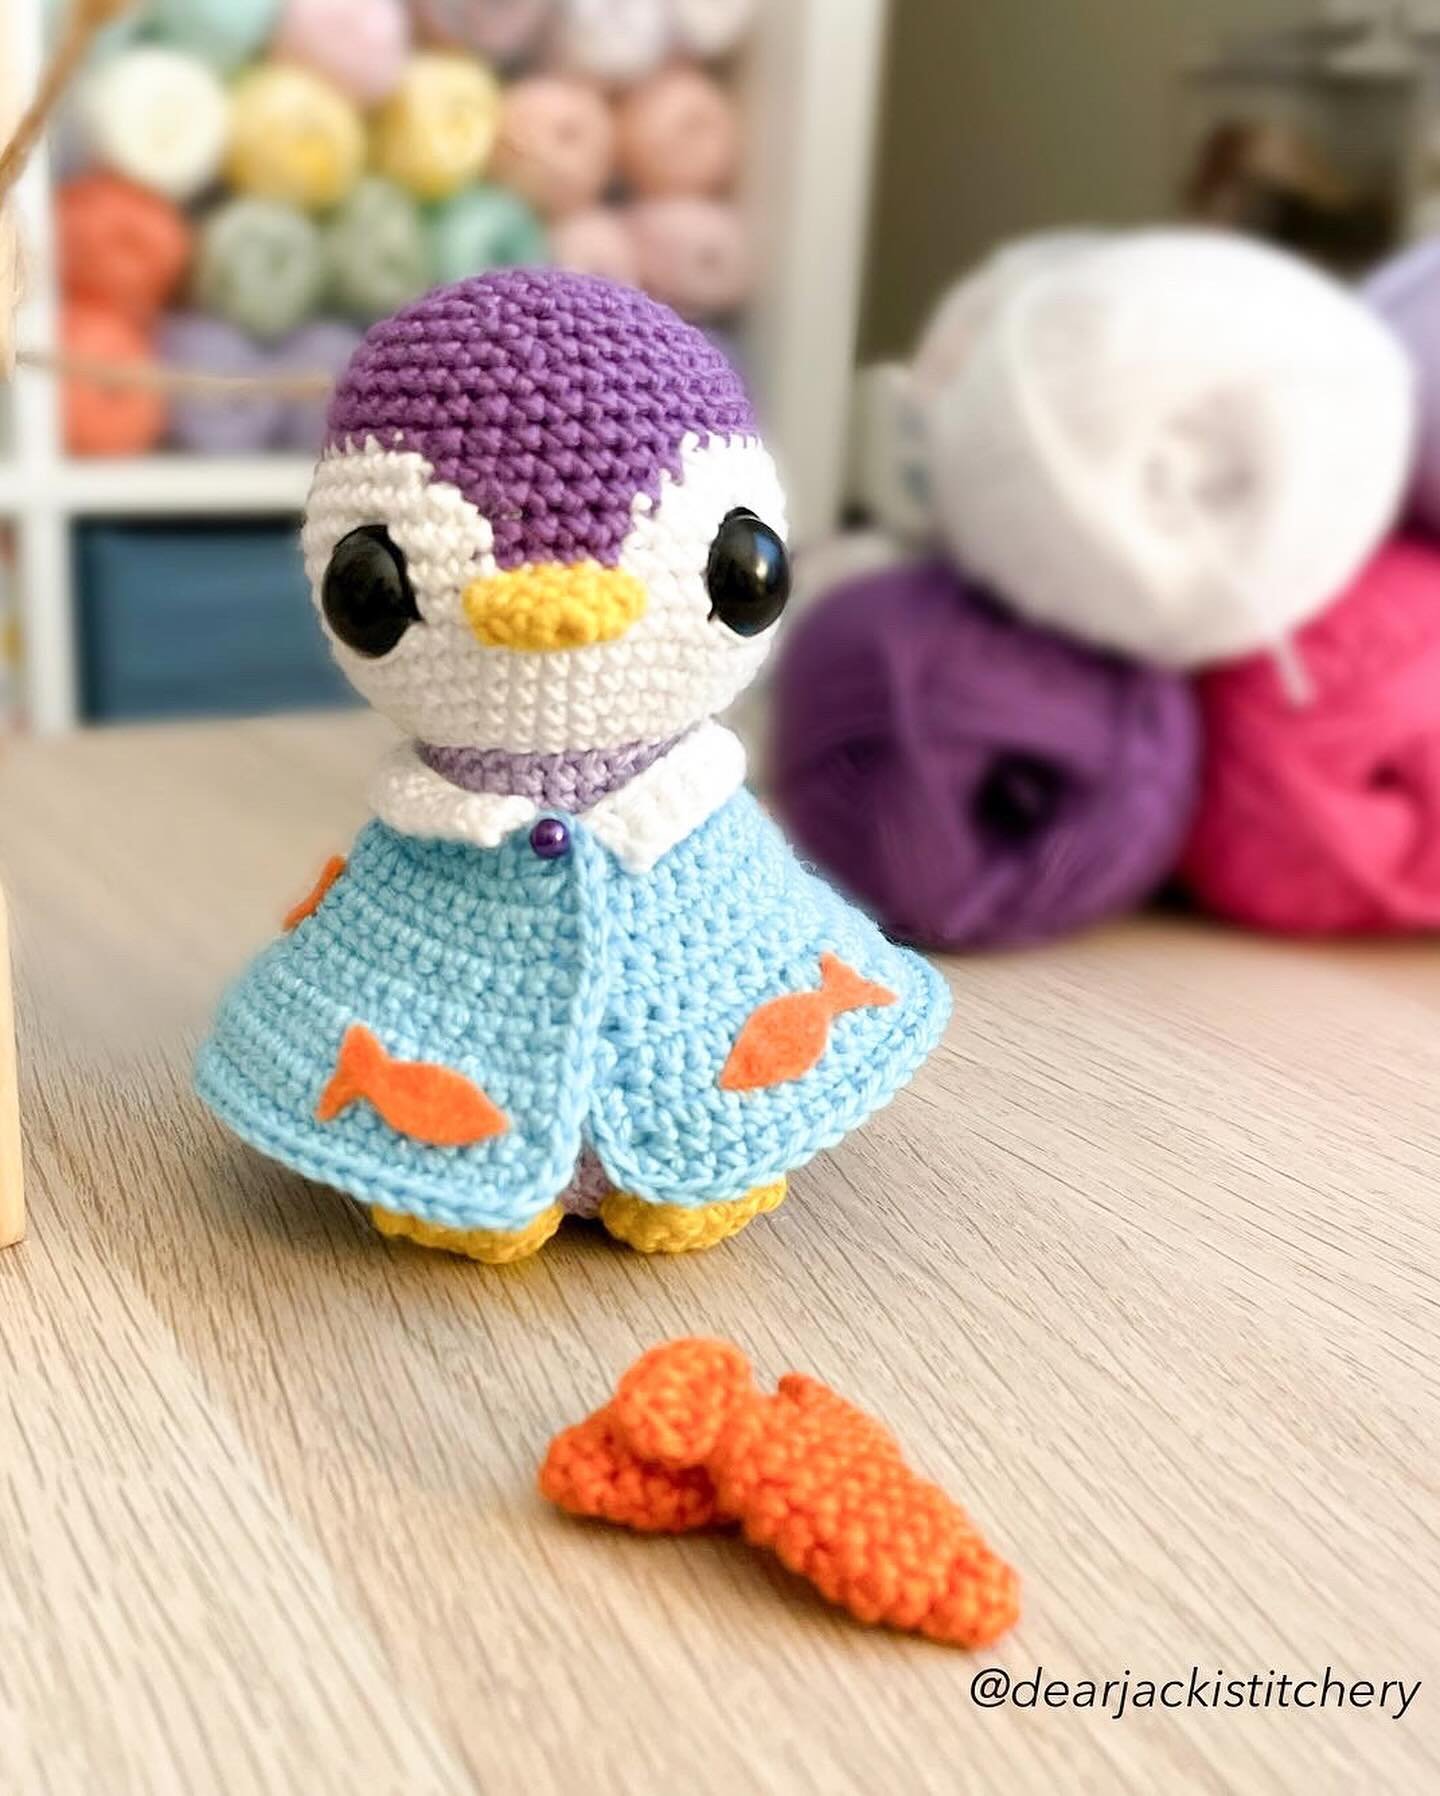 This years #amigurumay2024 is now here! I have to admit, I struggle with posting everyday and I have yet to fully complete this challenge year after year. So I am here to try once again because it is so fun!

I am excited to see old friends that get 